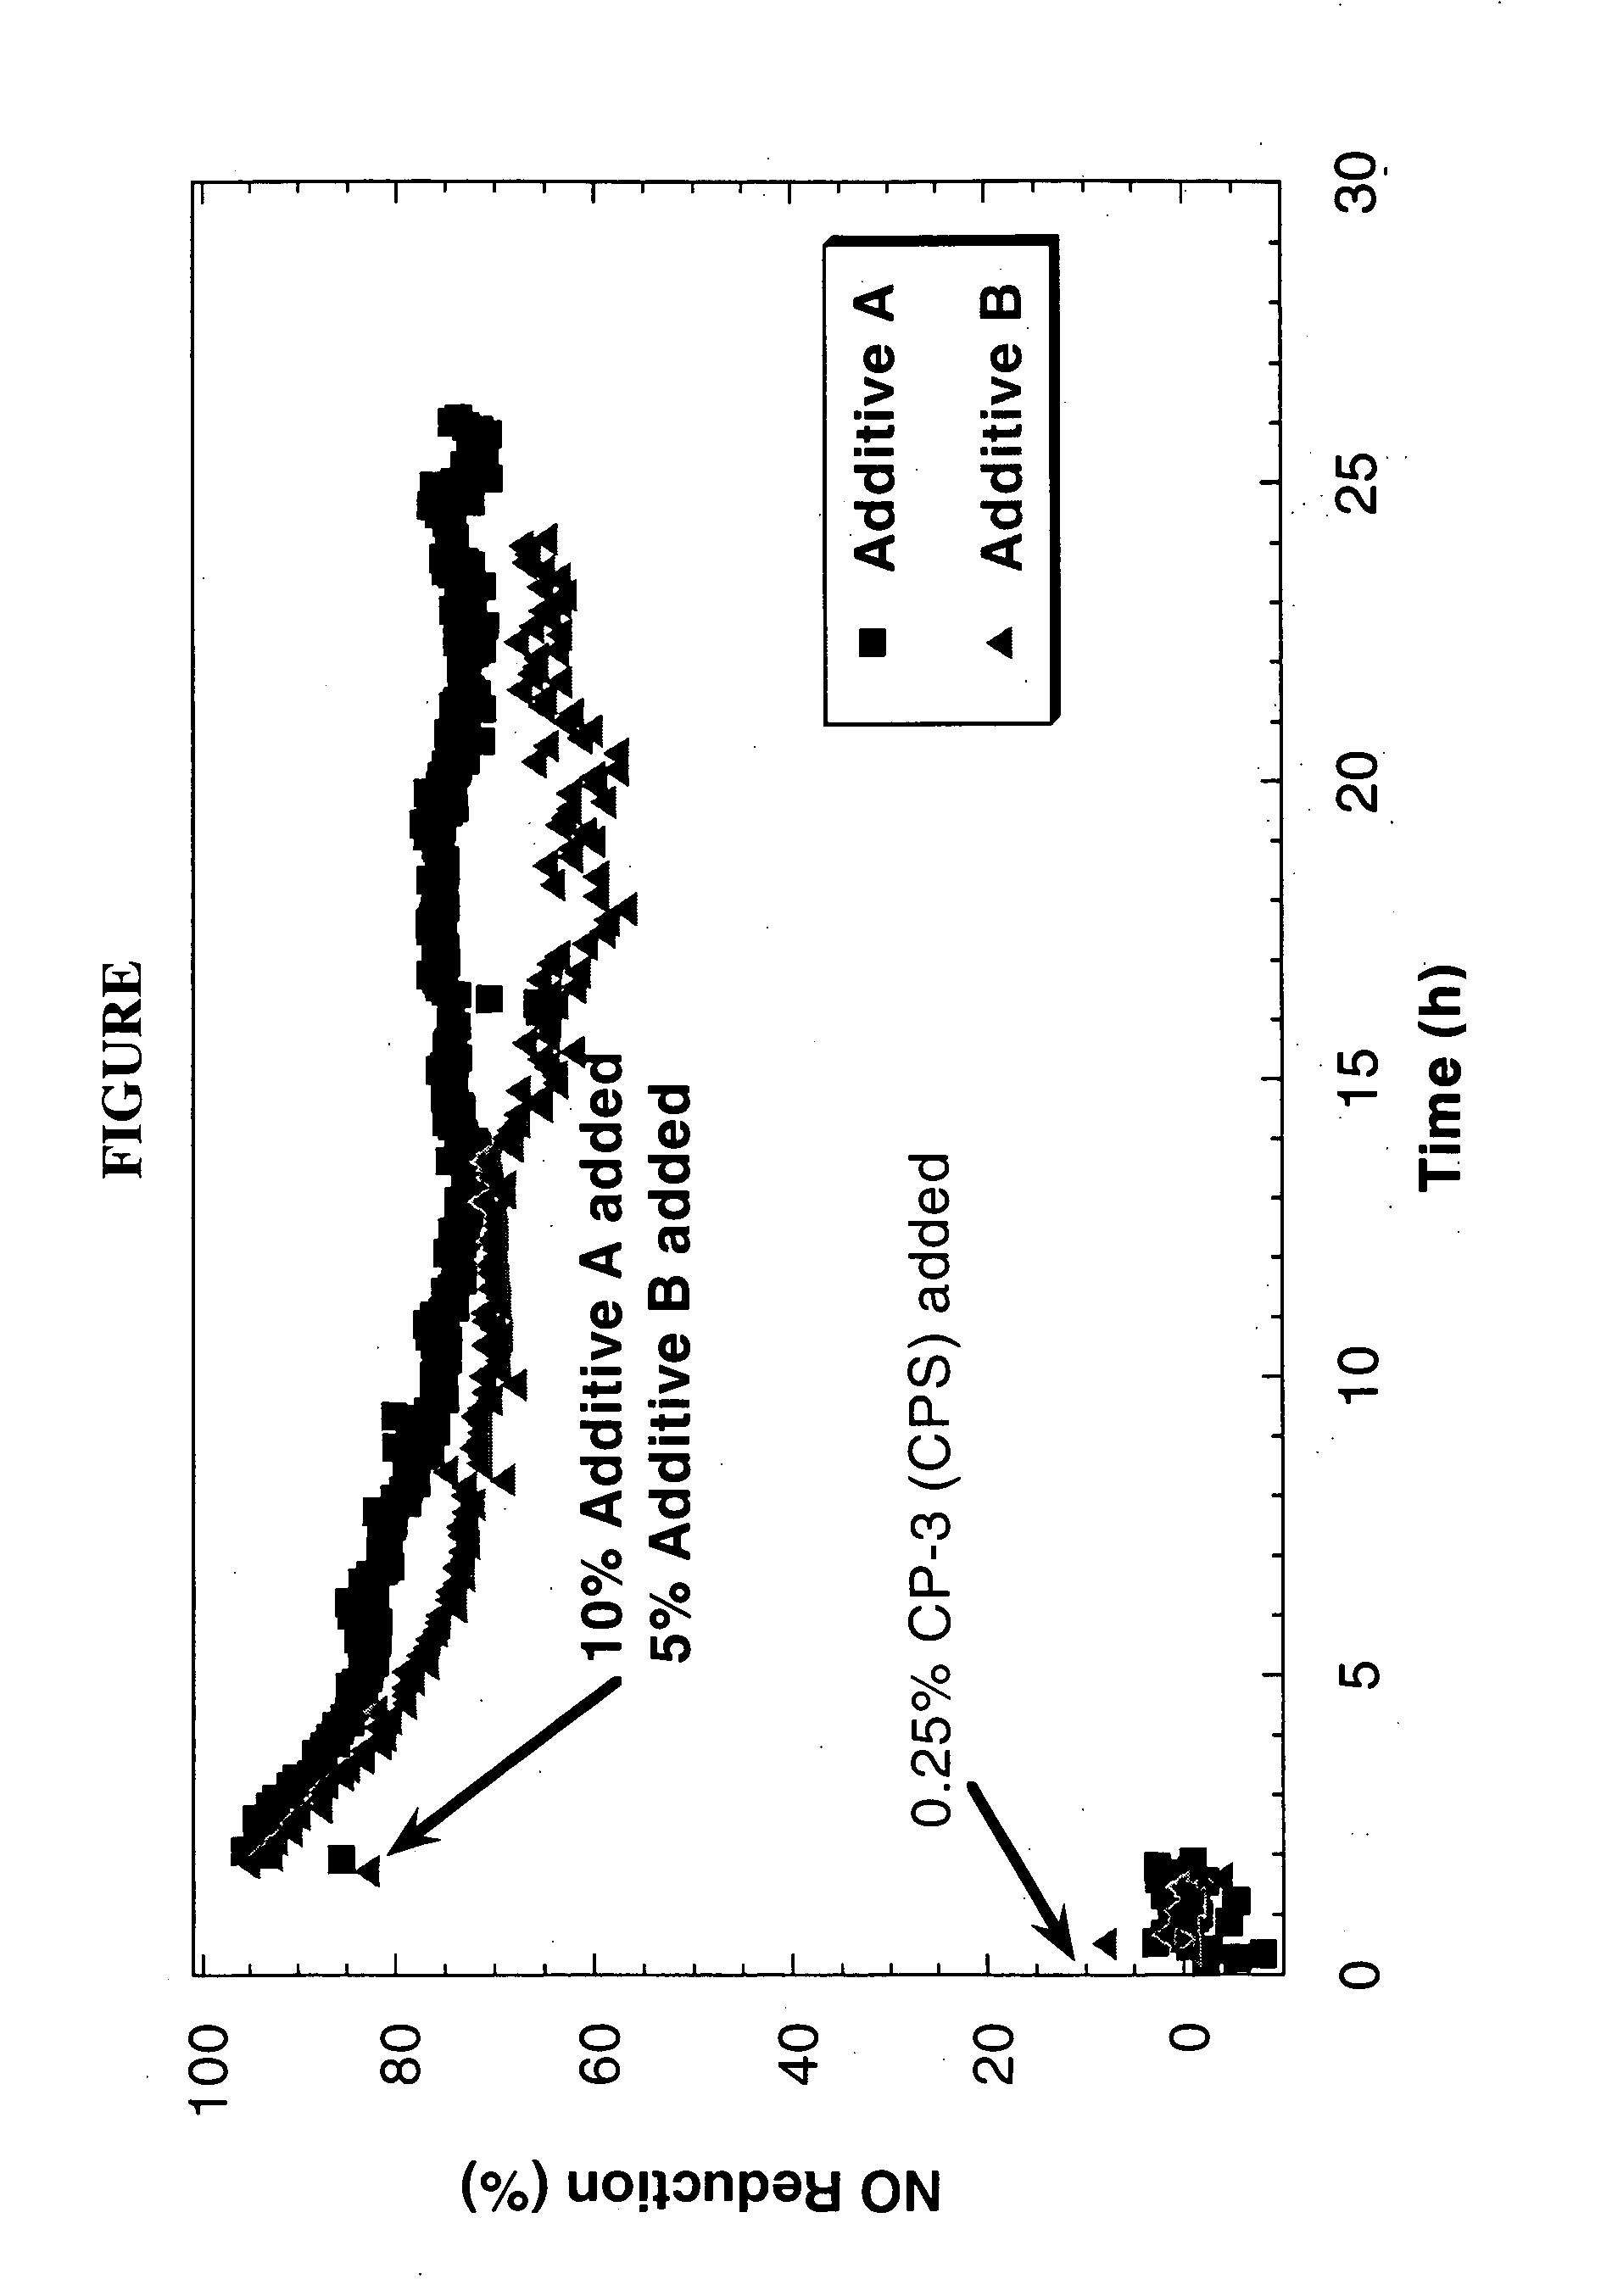 Ferrierite compositions for reducing NOx emissions during fluid catalytic cracking